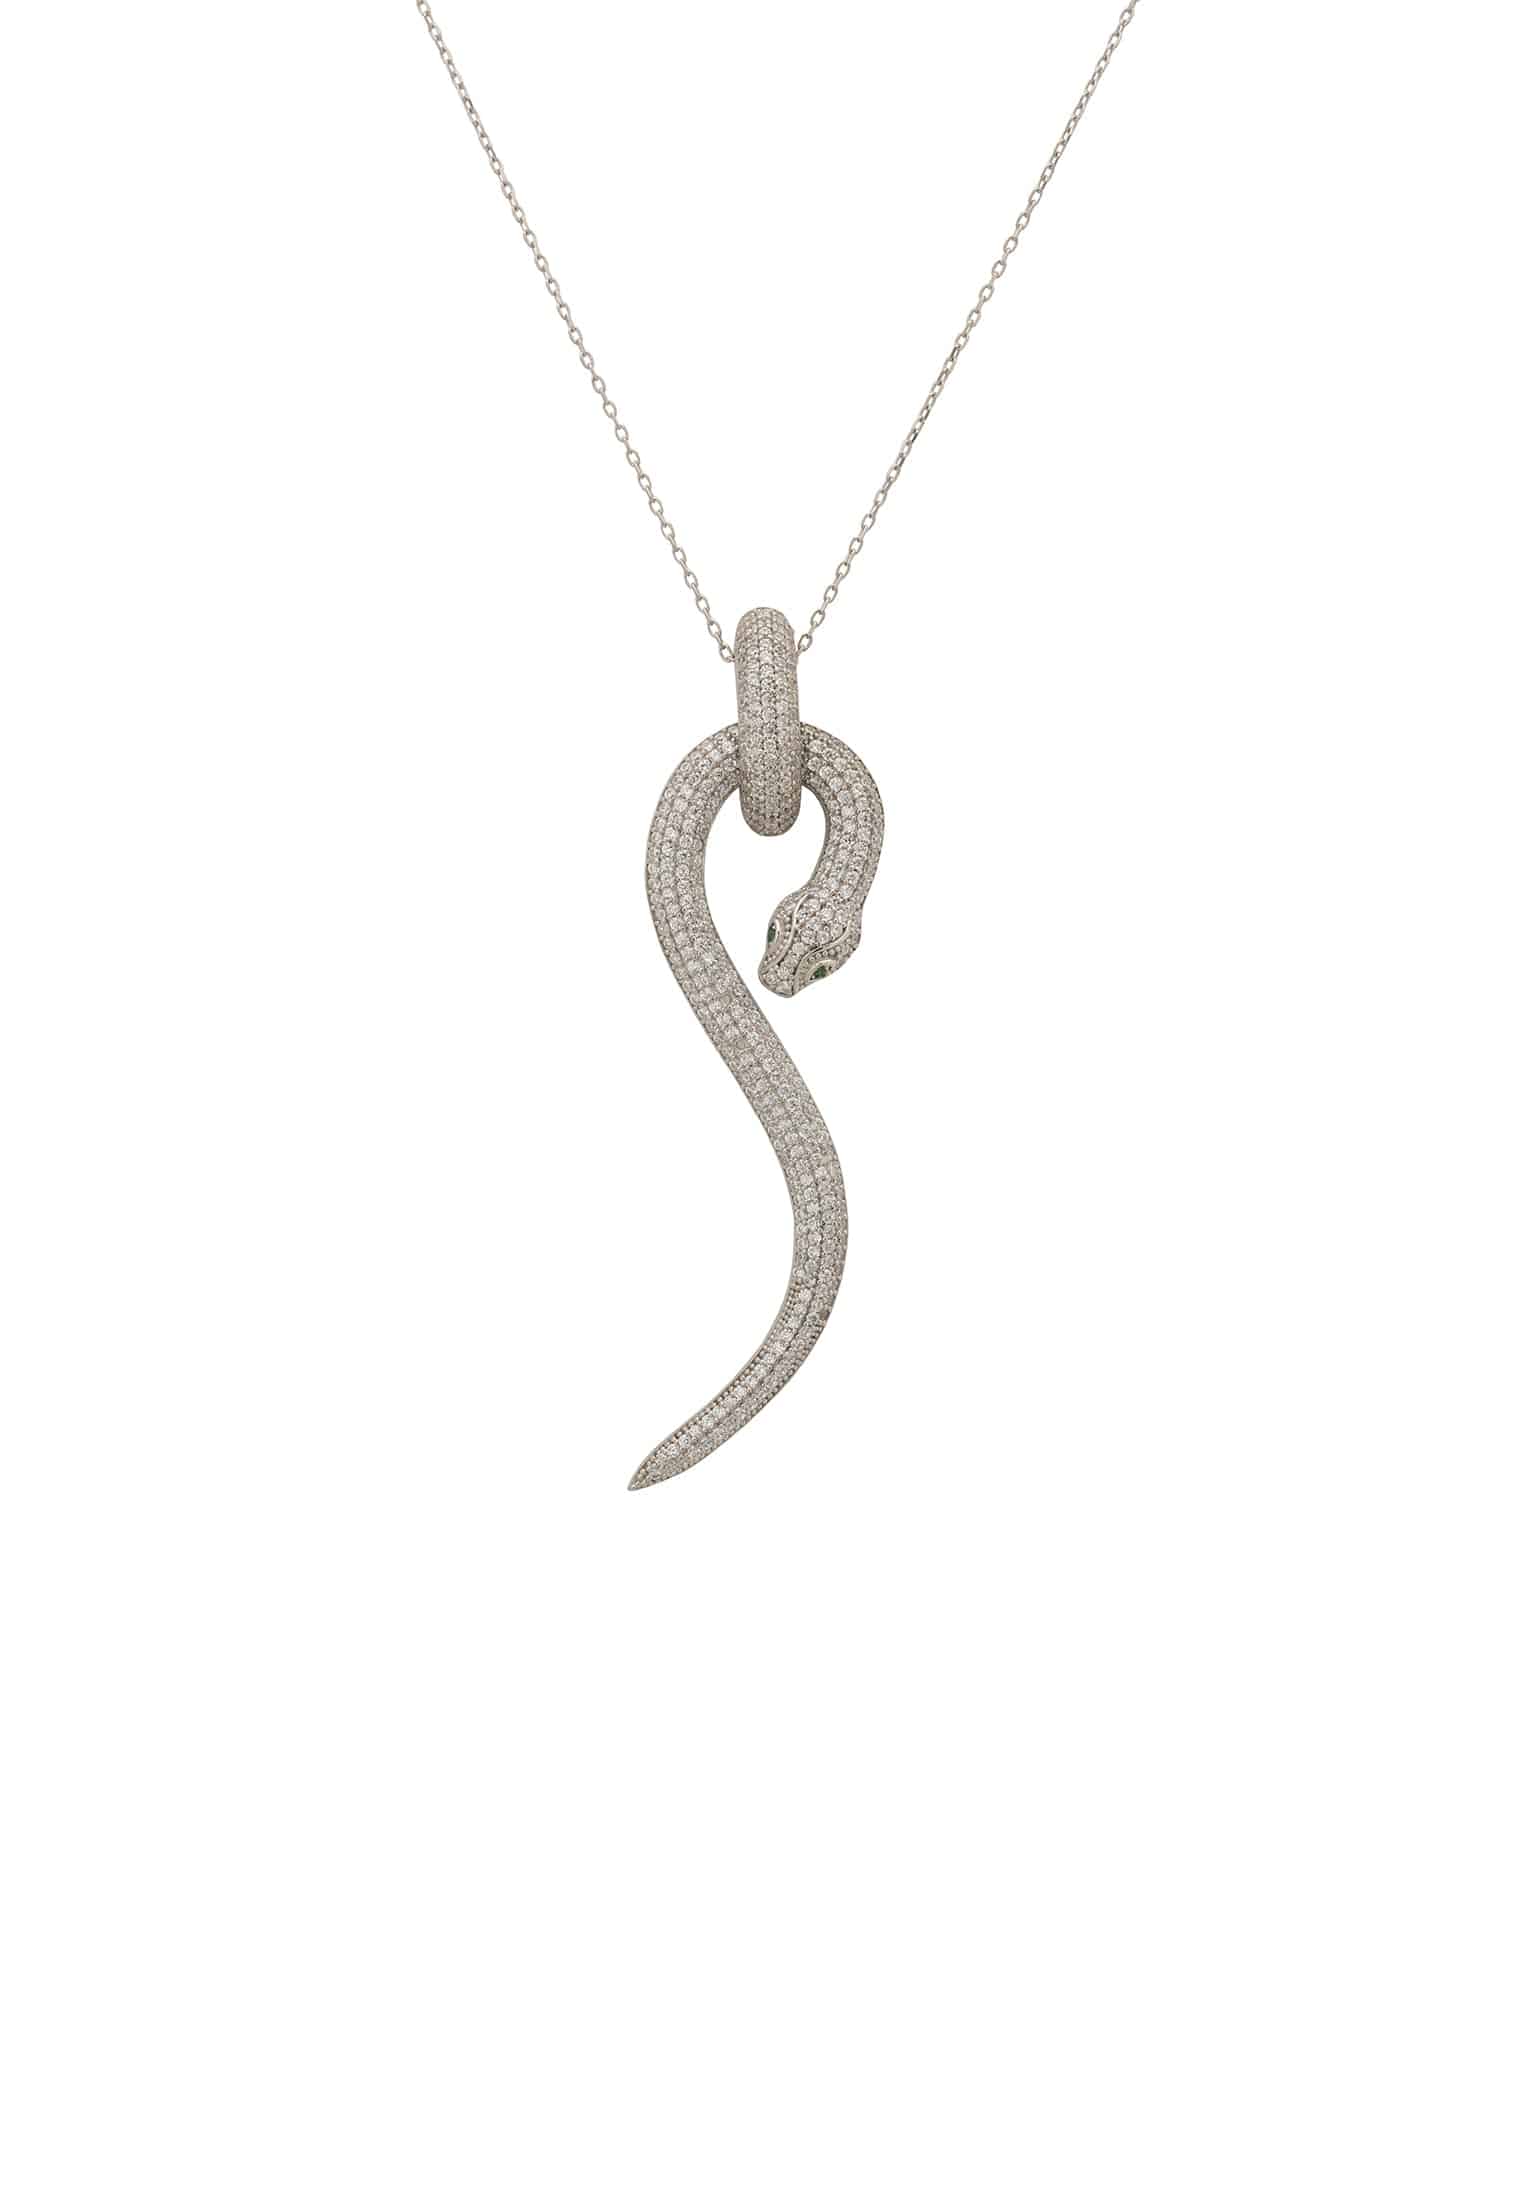 Silver Anaconda Pendant Necklace with Zircon Accents - 925 Sterling Silver Jewelry for Everyday Wear - Jewelry & Watches - Bijou Her -  -  - 